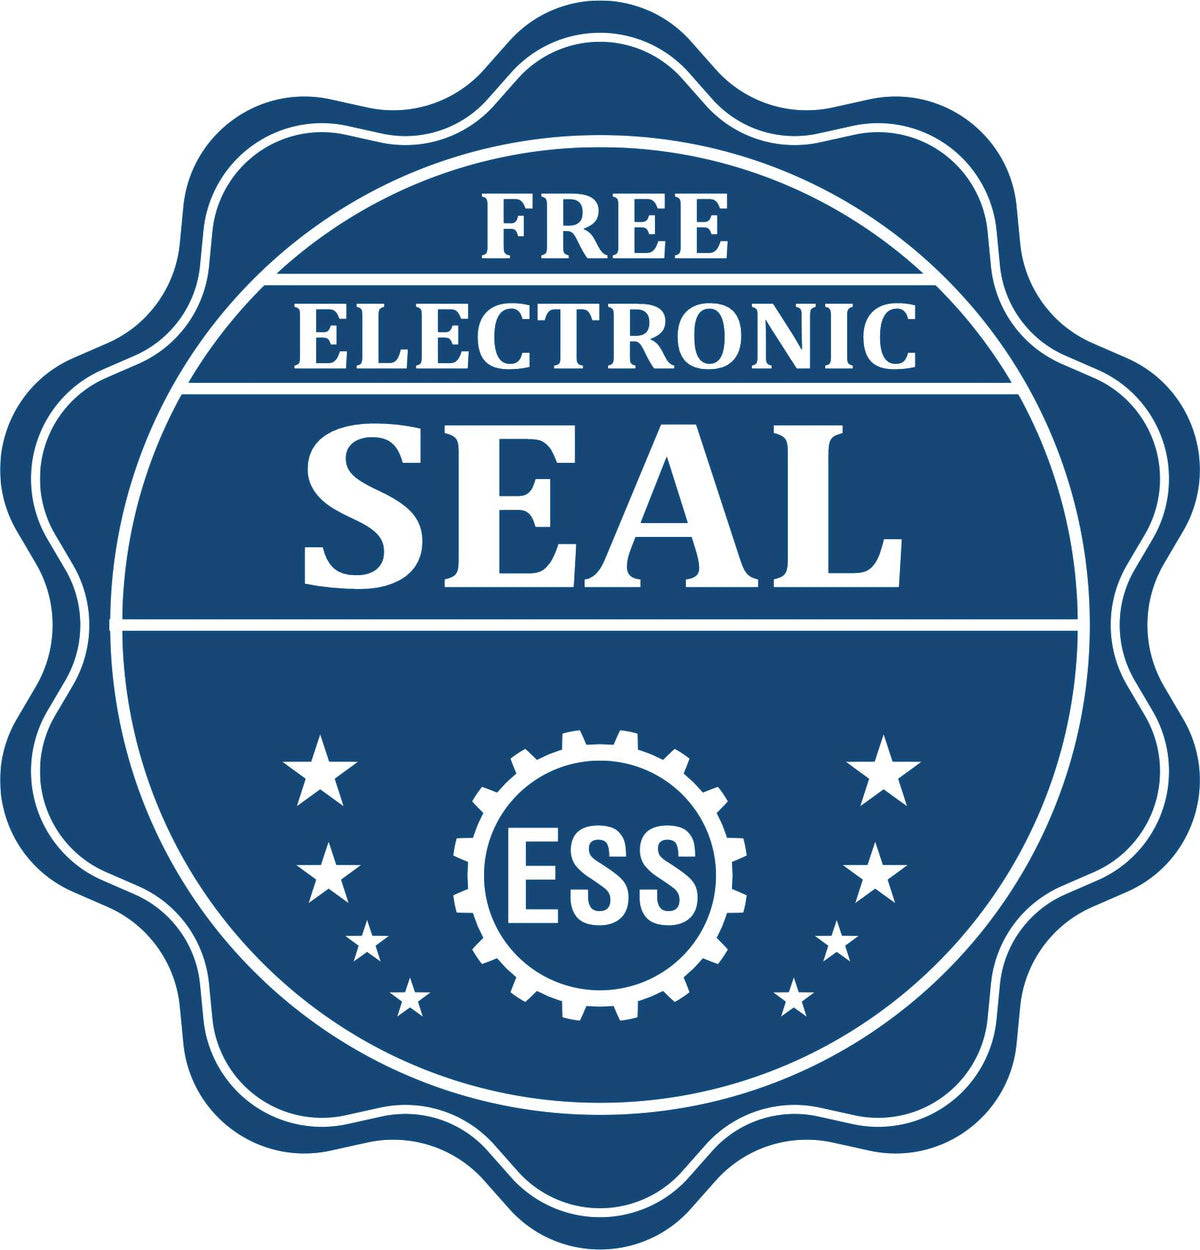 A badge showing a free electronic seal for the State of New Hampshire Long Reach Architectural Embossing Seal with stars and the ESS gear on the emblem.